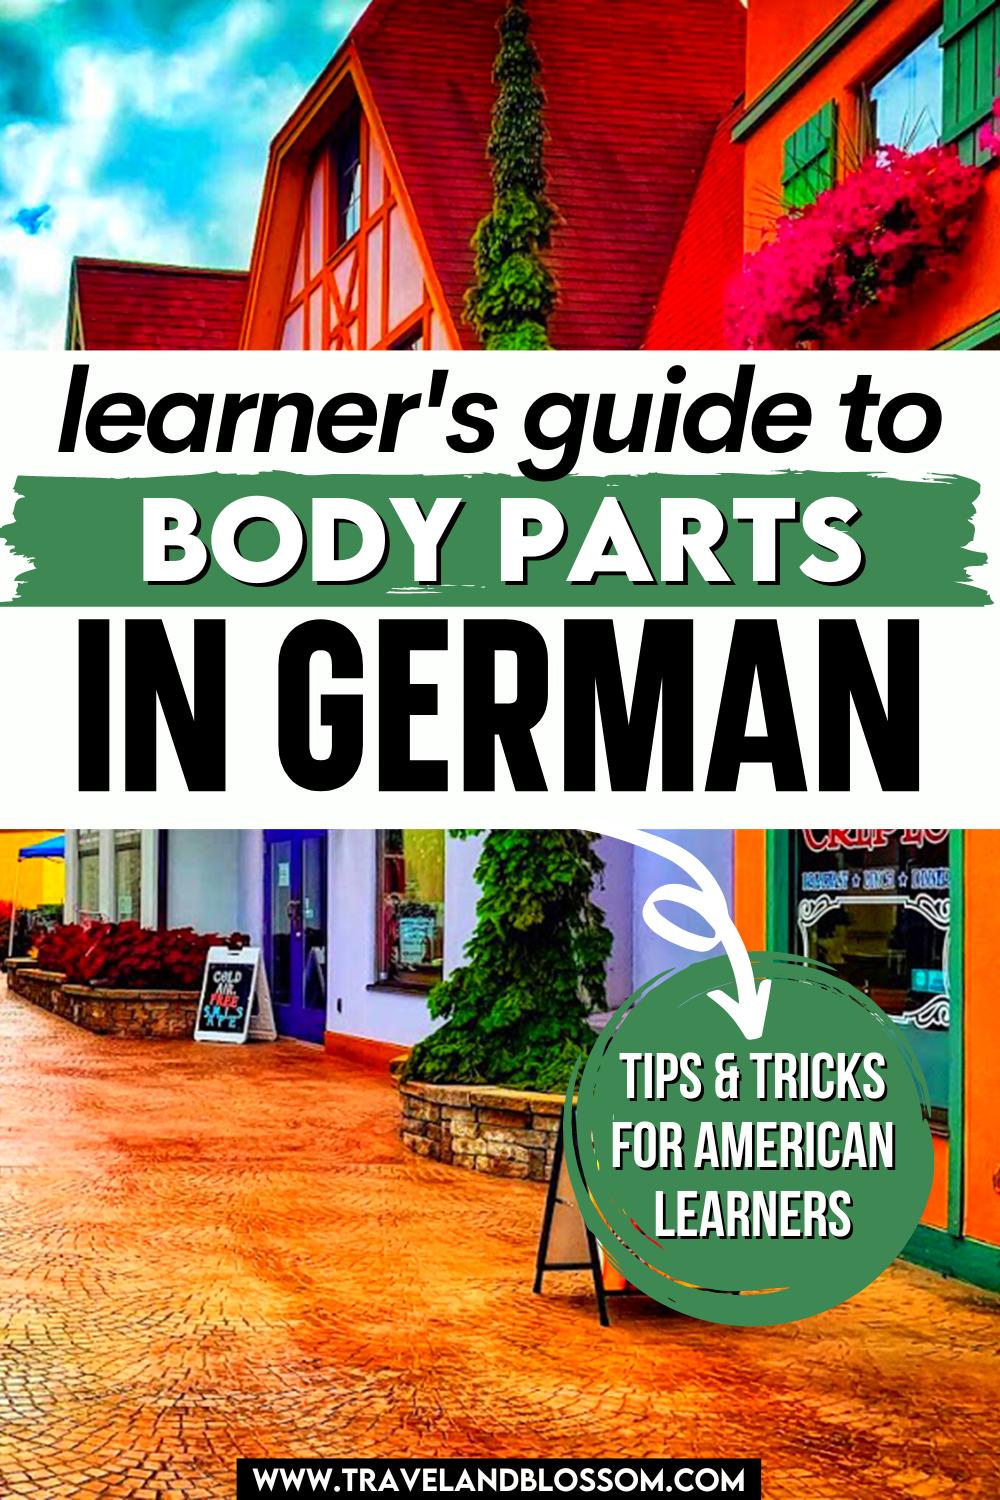 A Step-by-Step Guide to the Body Parts in German